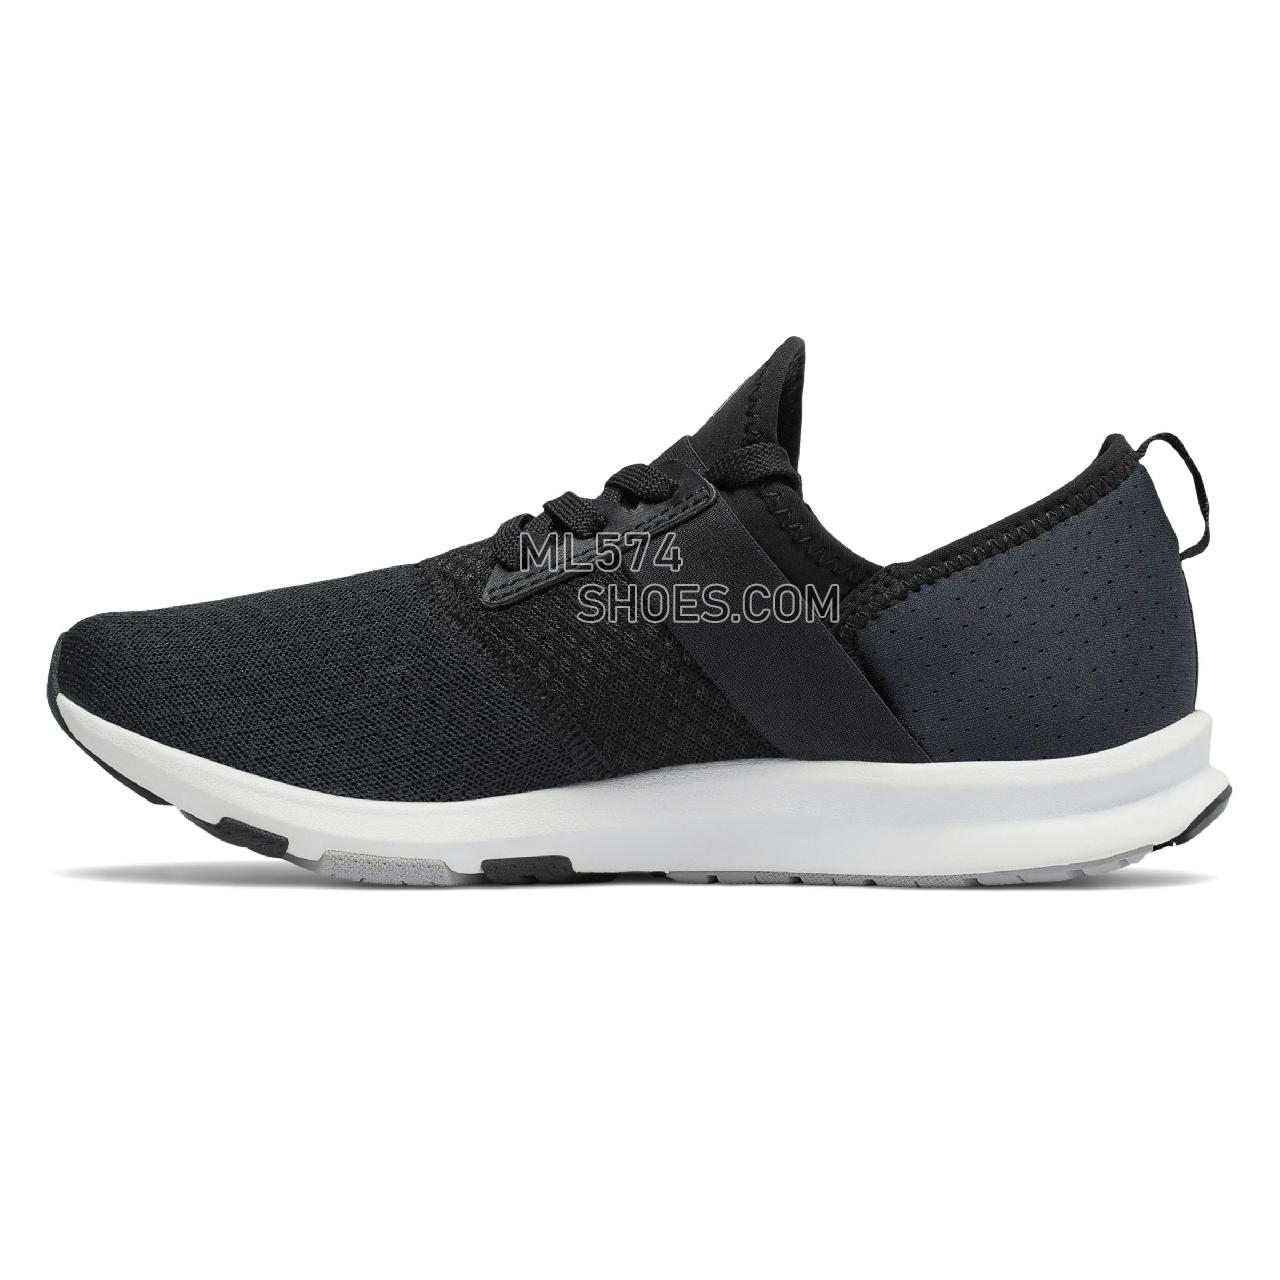 New Balance FuelCore NERGIZE - Women's  - X-training Black with Grey and White - WXNRGBK